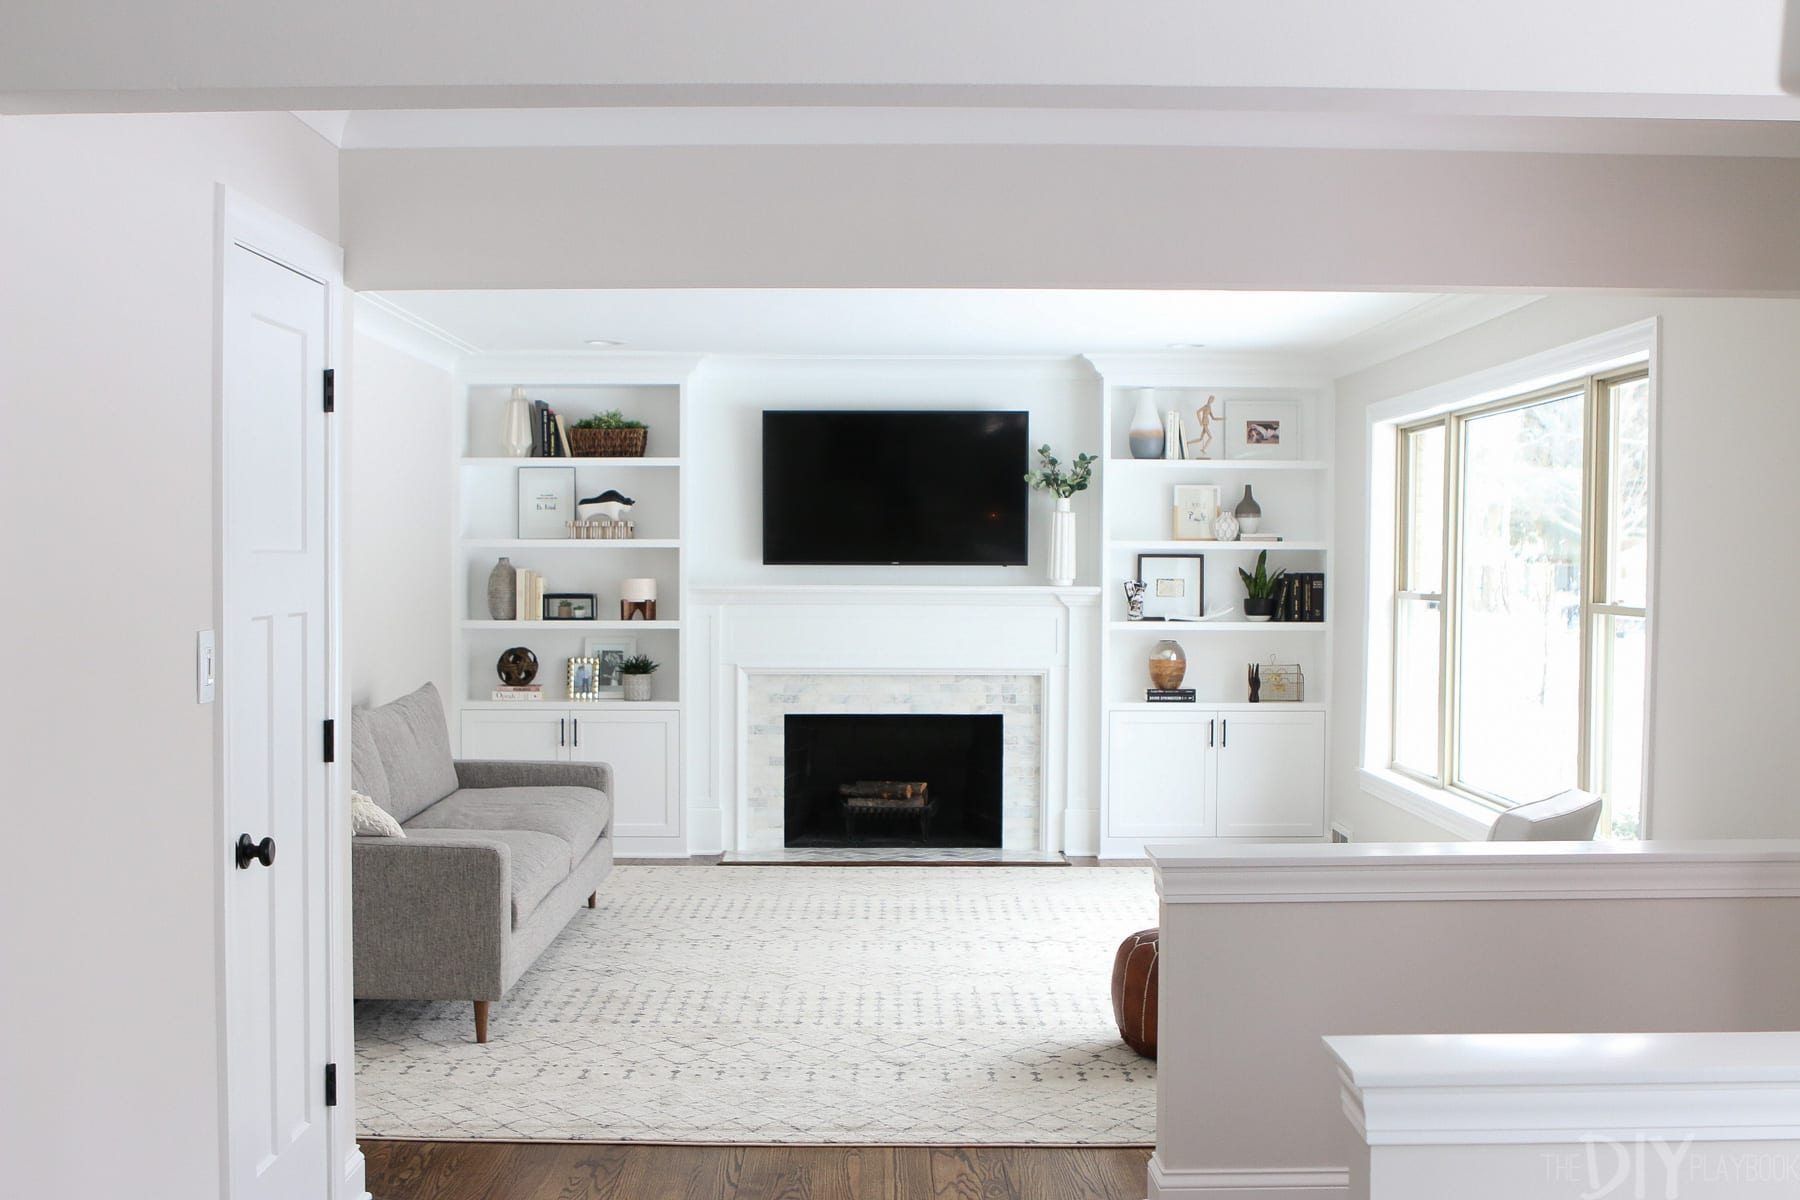 White Built Ins Around The Fireplace, Brick Fireplace With Shelves On Both Sides